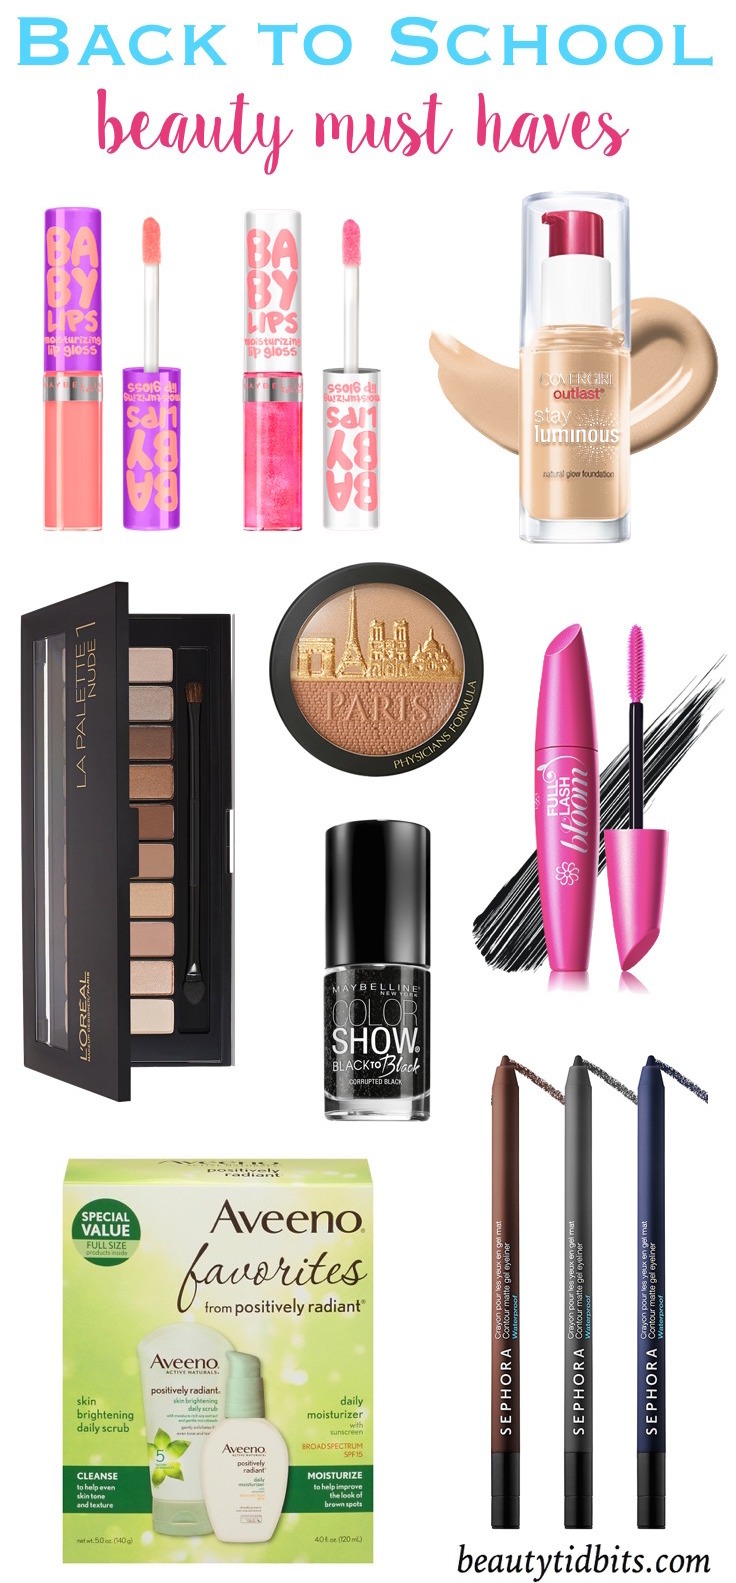 From smudge-proof eyeliners to glossy lip colors, here are some of my back-to-school beauty picks that will have you covered for whatever comes your way!